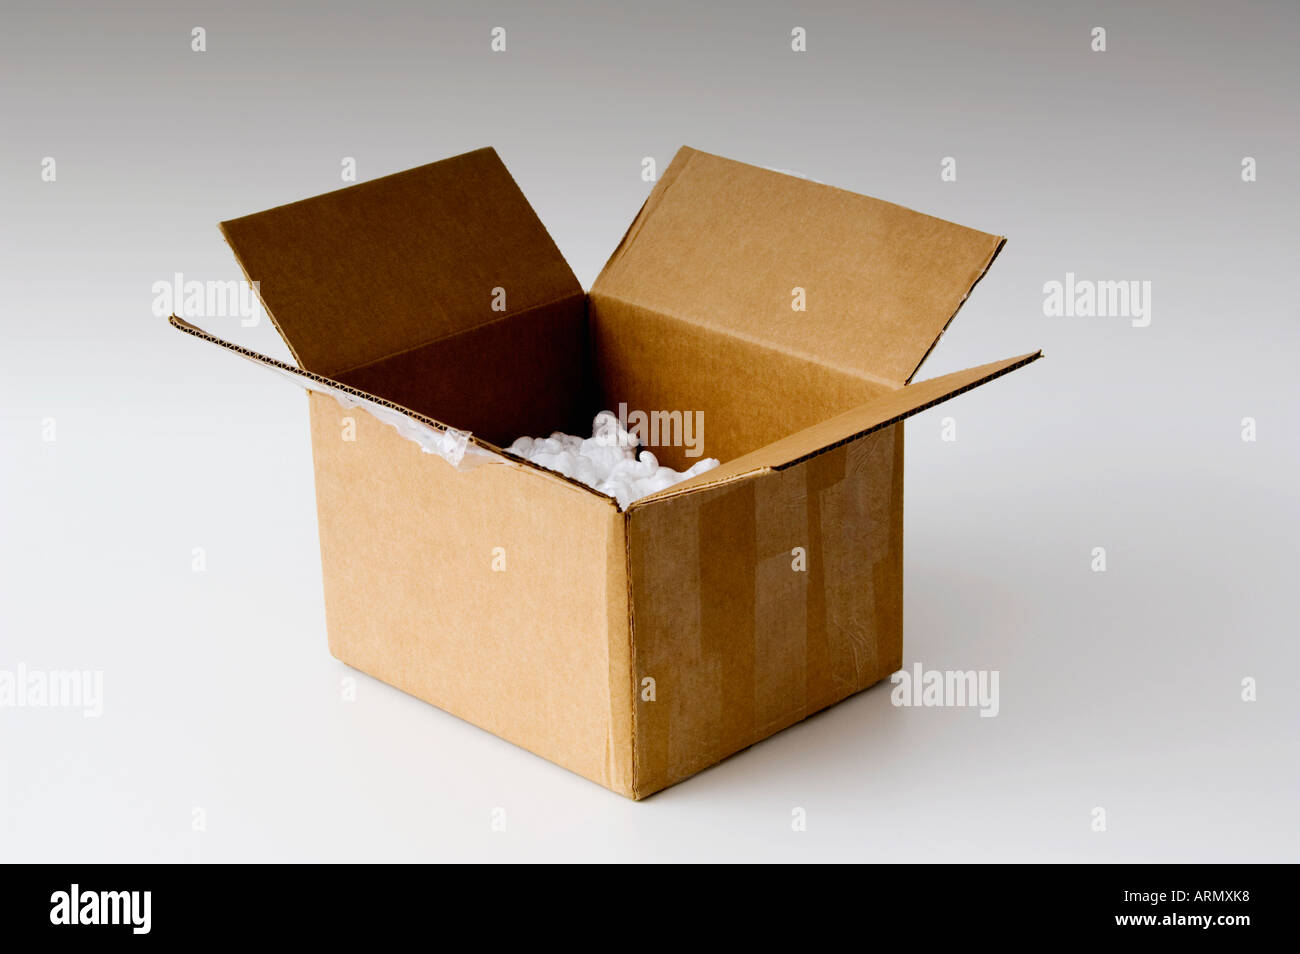 Packing box with styrofoam packaging Stock Photo